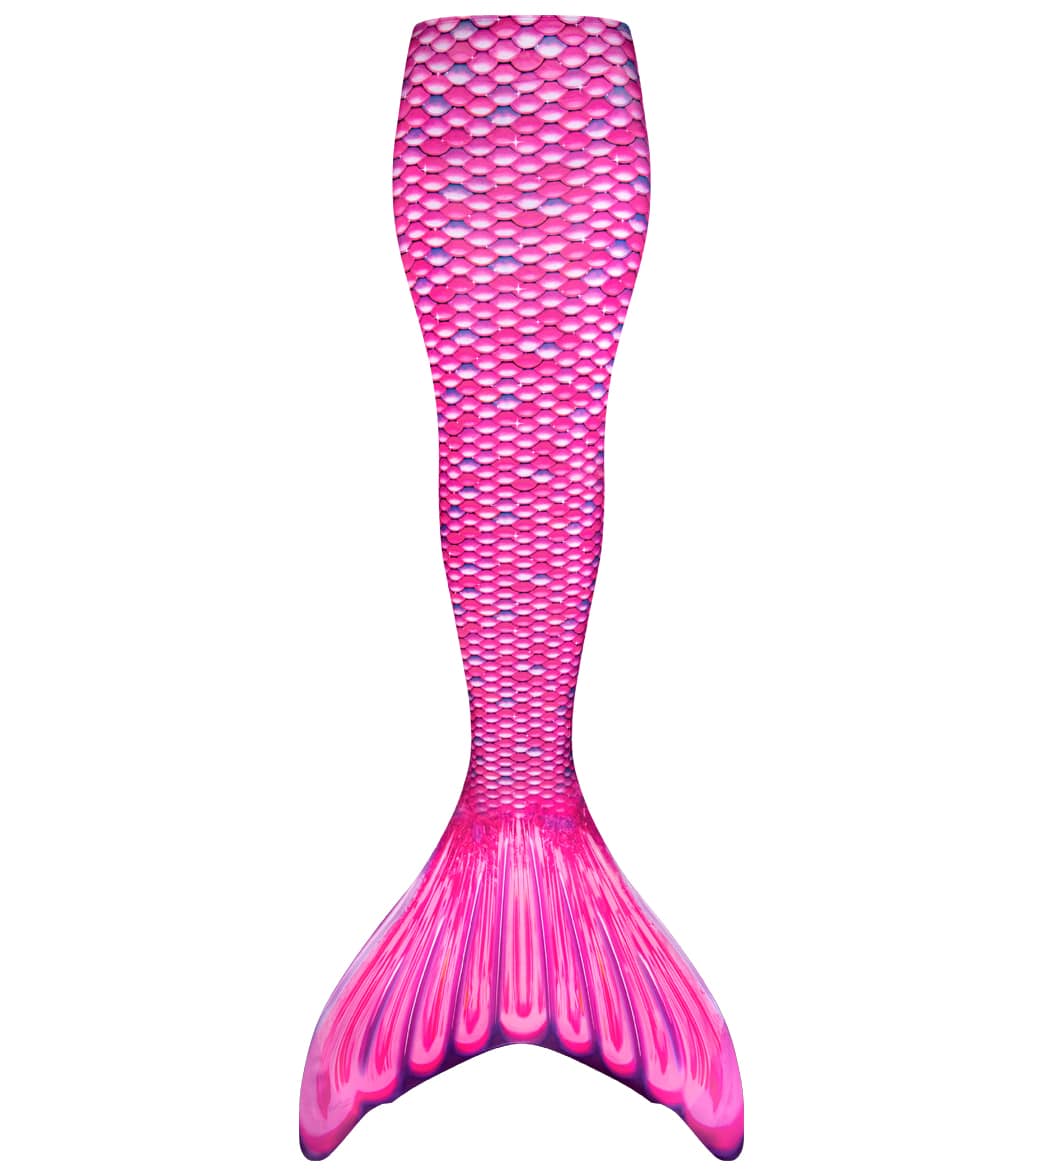 Fin Fun Malibu Pink Mermaid Tail & Monofin Youth/Adult - Youth Large 10 - Swimoutlet.com